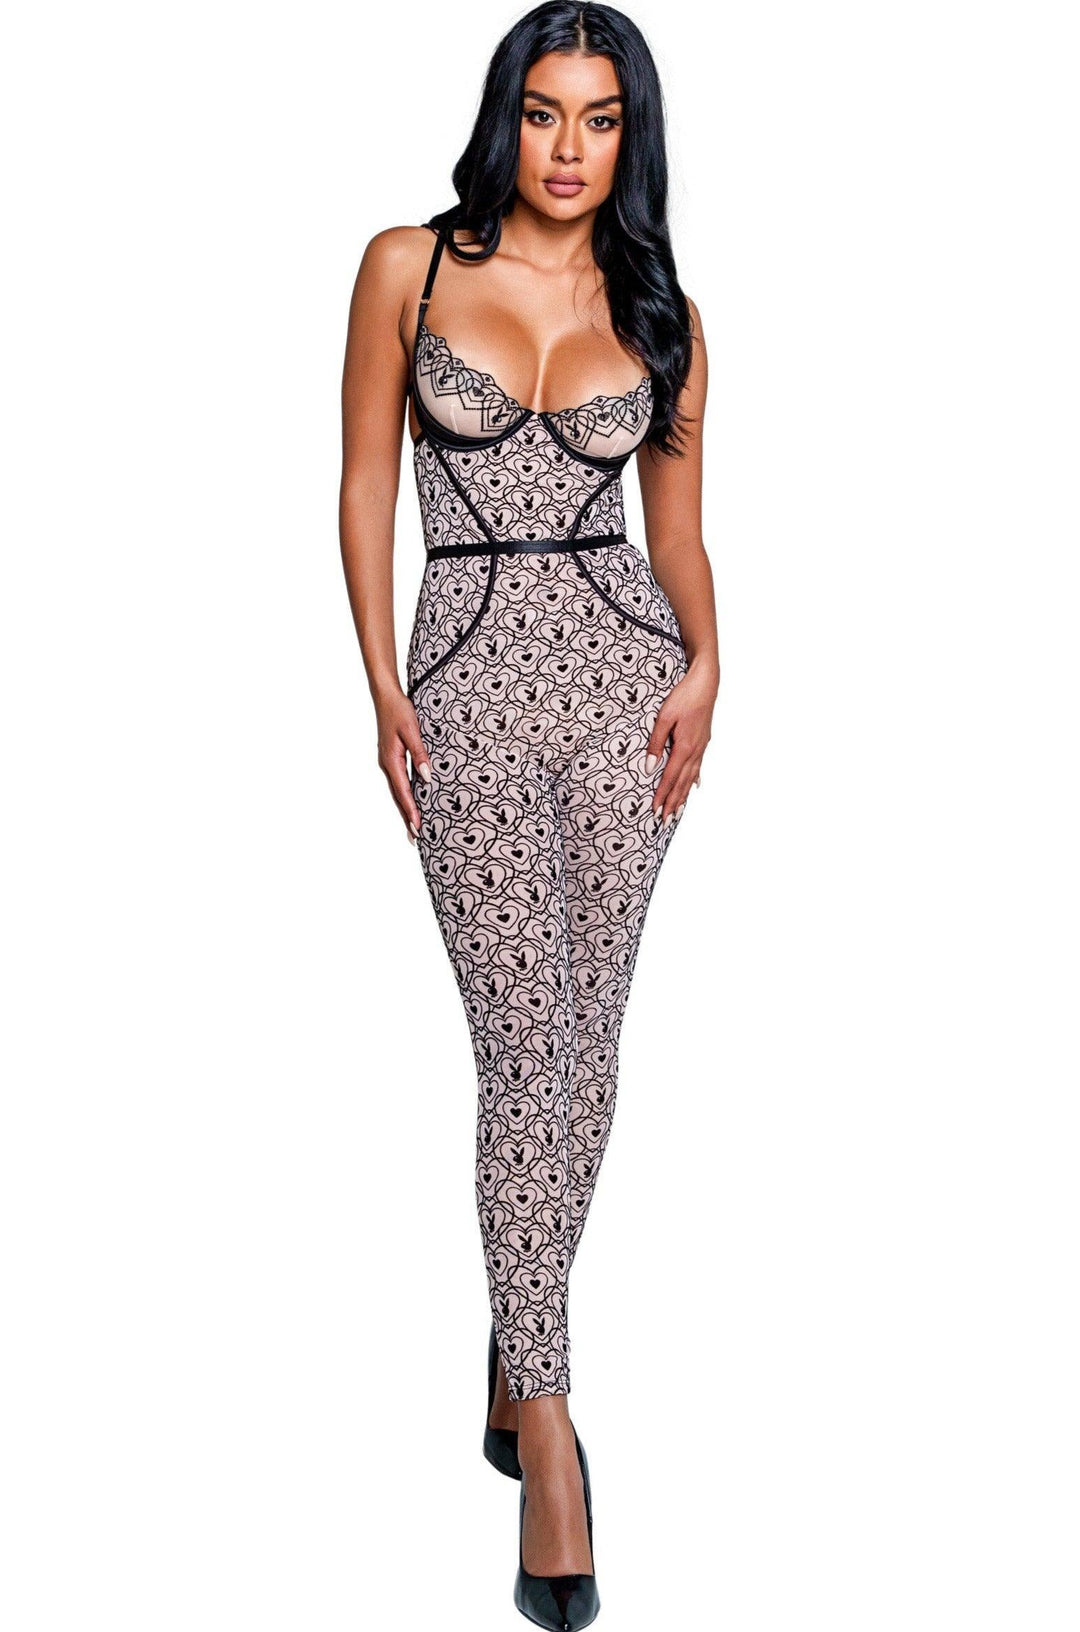 Playboy Bunny Kiss Sleeveless Catsuit - SEXYSHOES.COM